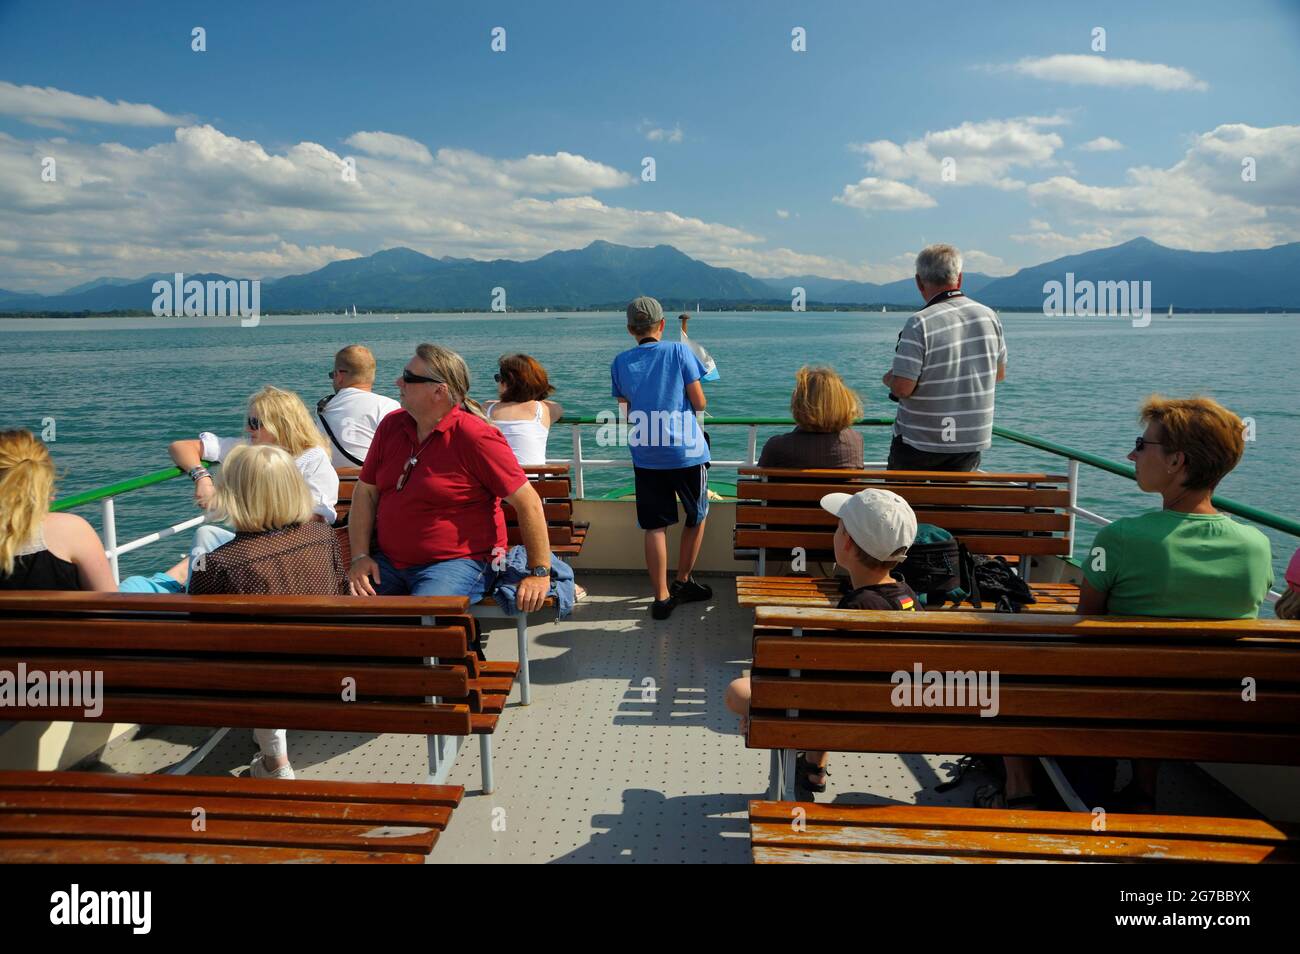 Chiemsee, vacationer on excursion boat of the Chiemsee Schifffahrt, August, Chiemgau, Bavaria, Germany Stock Photo